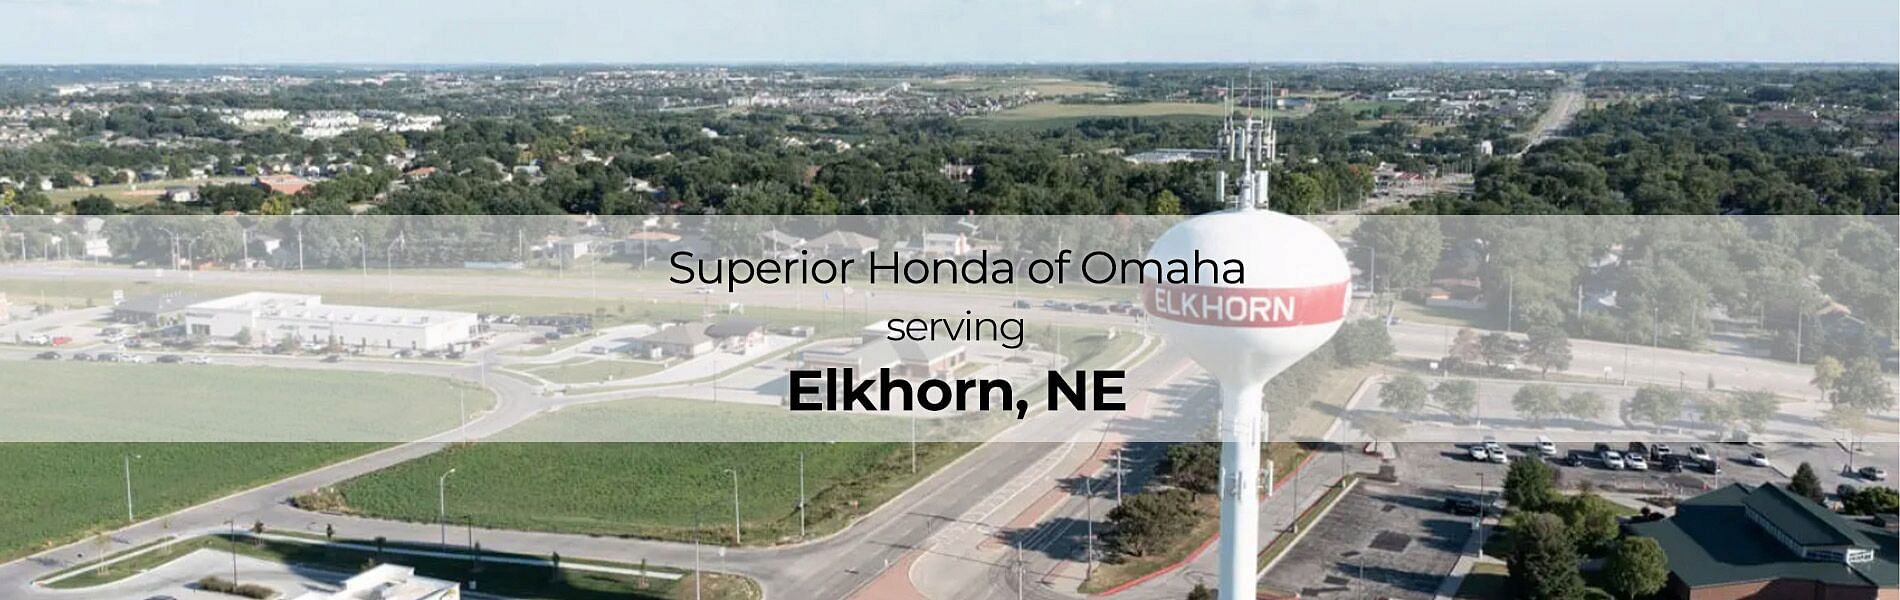 In the background weather tower with text in the front: Superior Honda of Omaha Serving Elkhorn NE